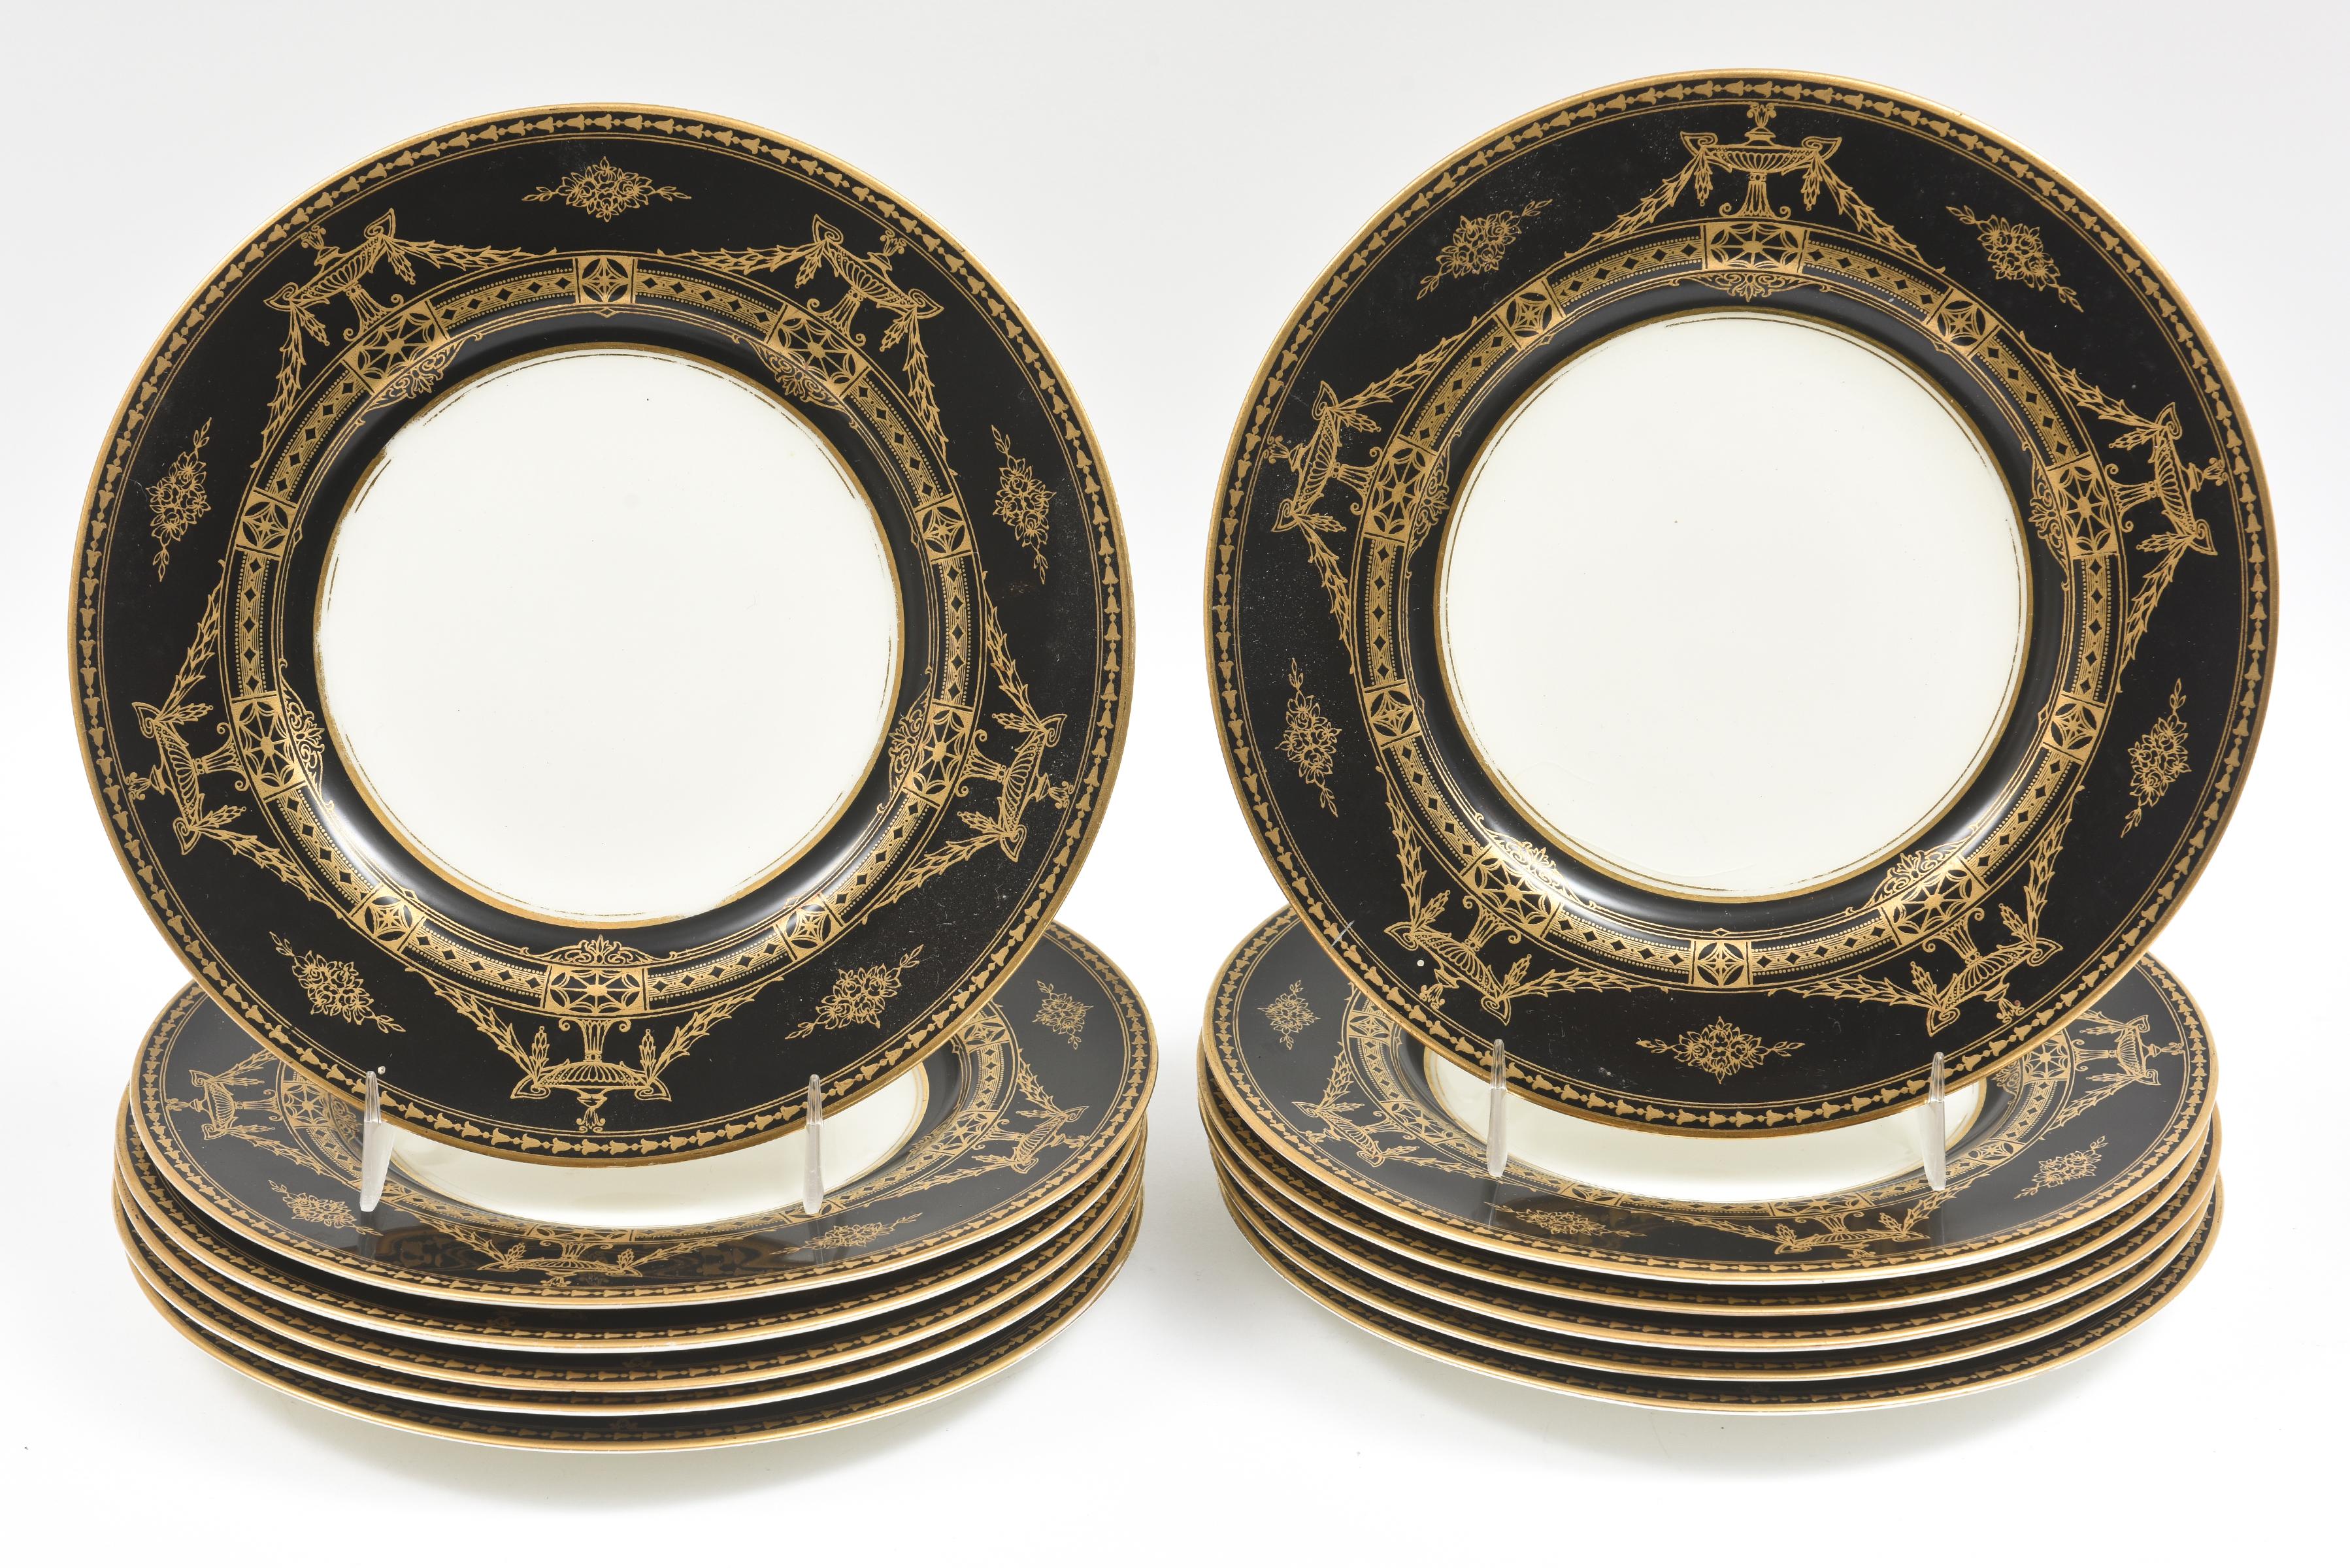 A fine and formal hard to find black ground fine china dessert service from one of England's oldest and finest manufacturers: Royal Worcester. This unique set features a 24 karat gilt neoclassical style pattern of urn and intricate swag motif on a